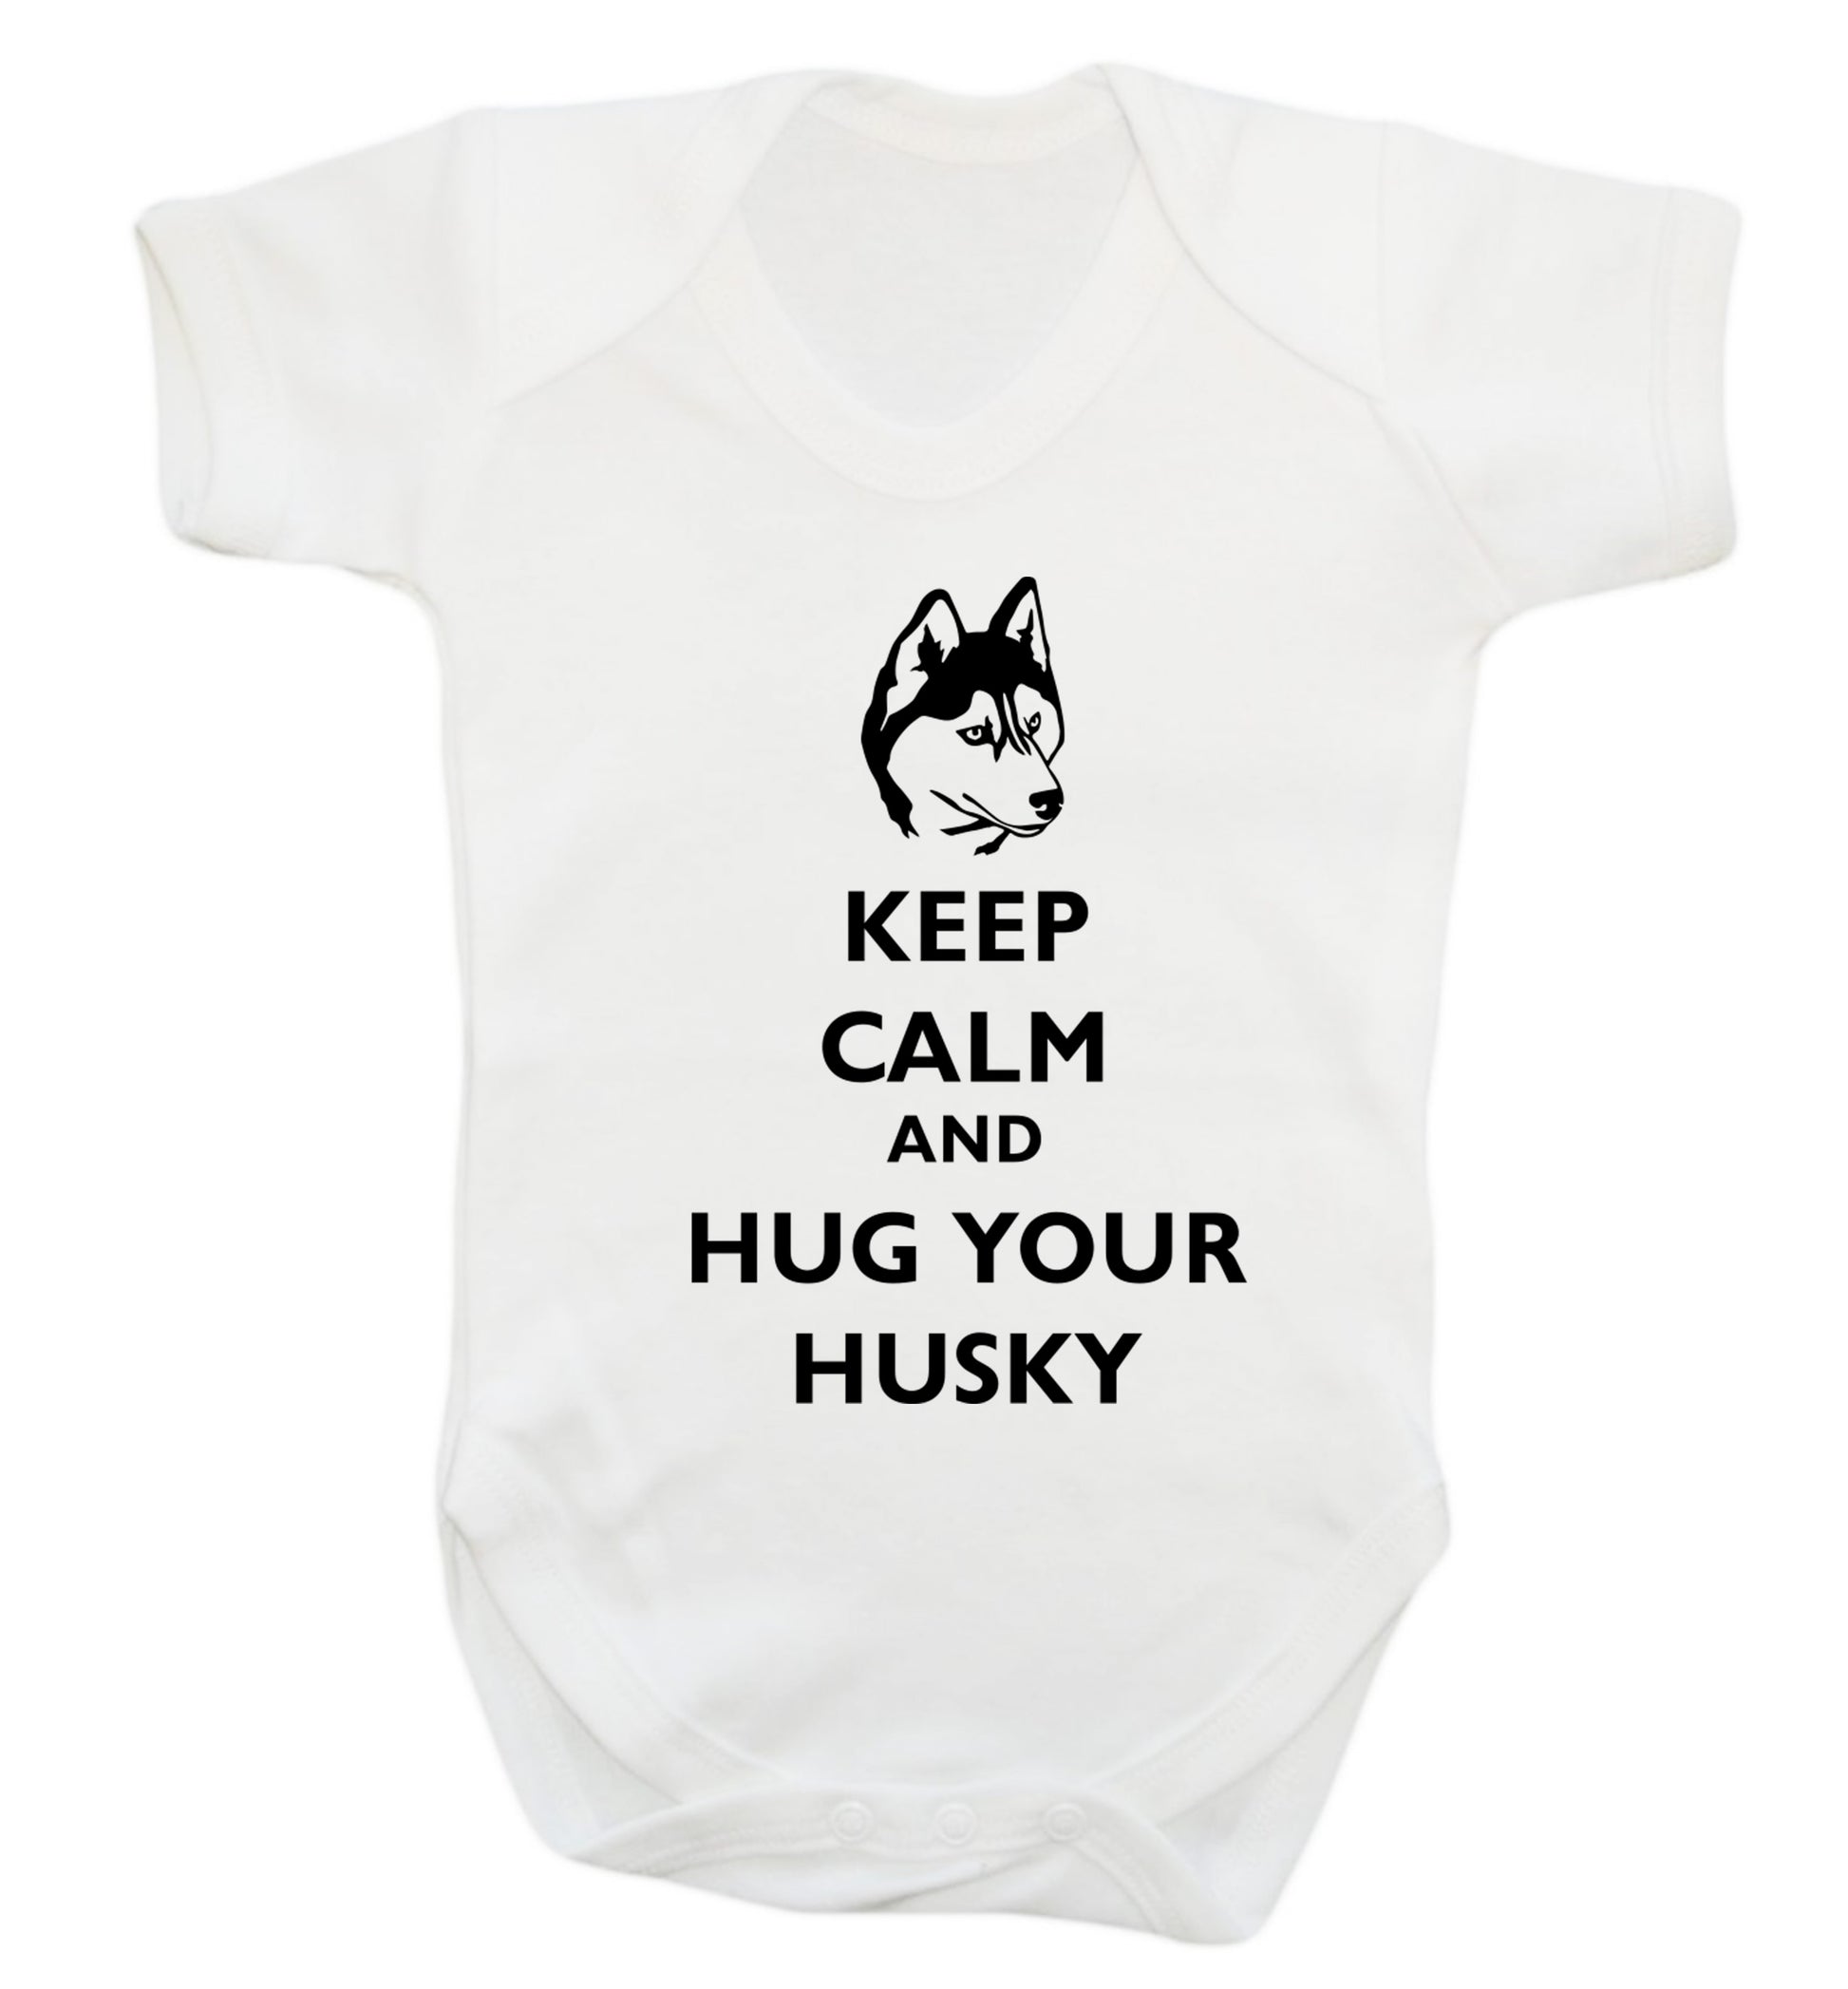 Keep calm and hug your husky Baby Vest white 18-24 months